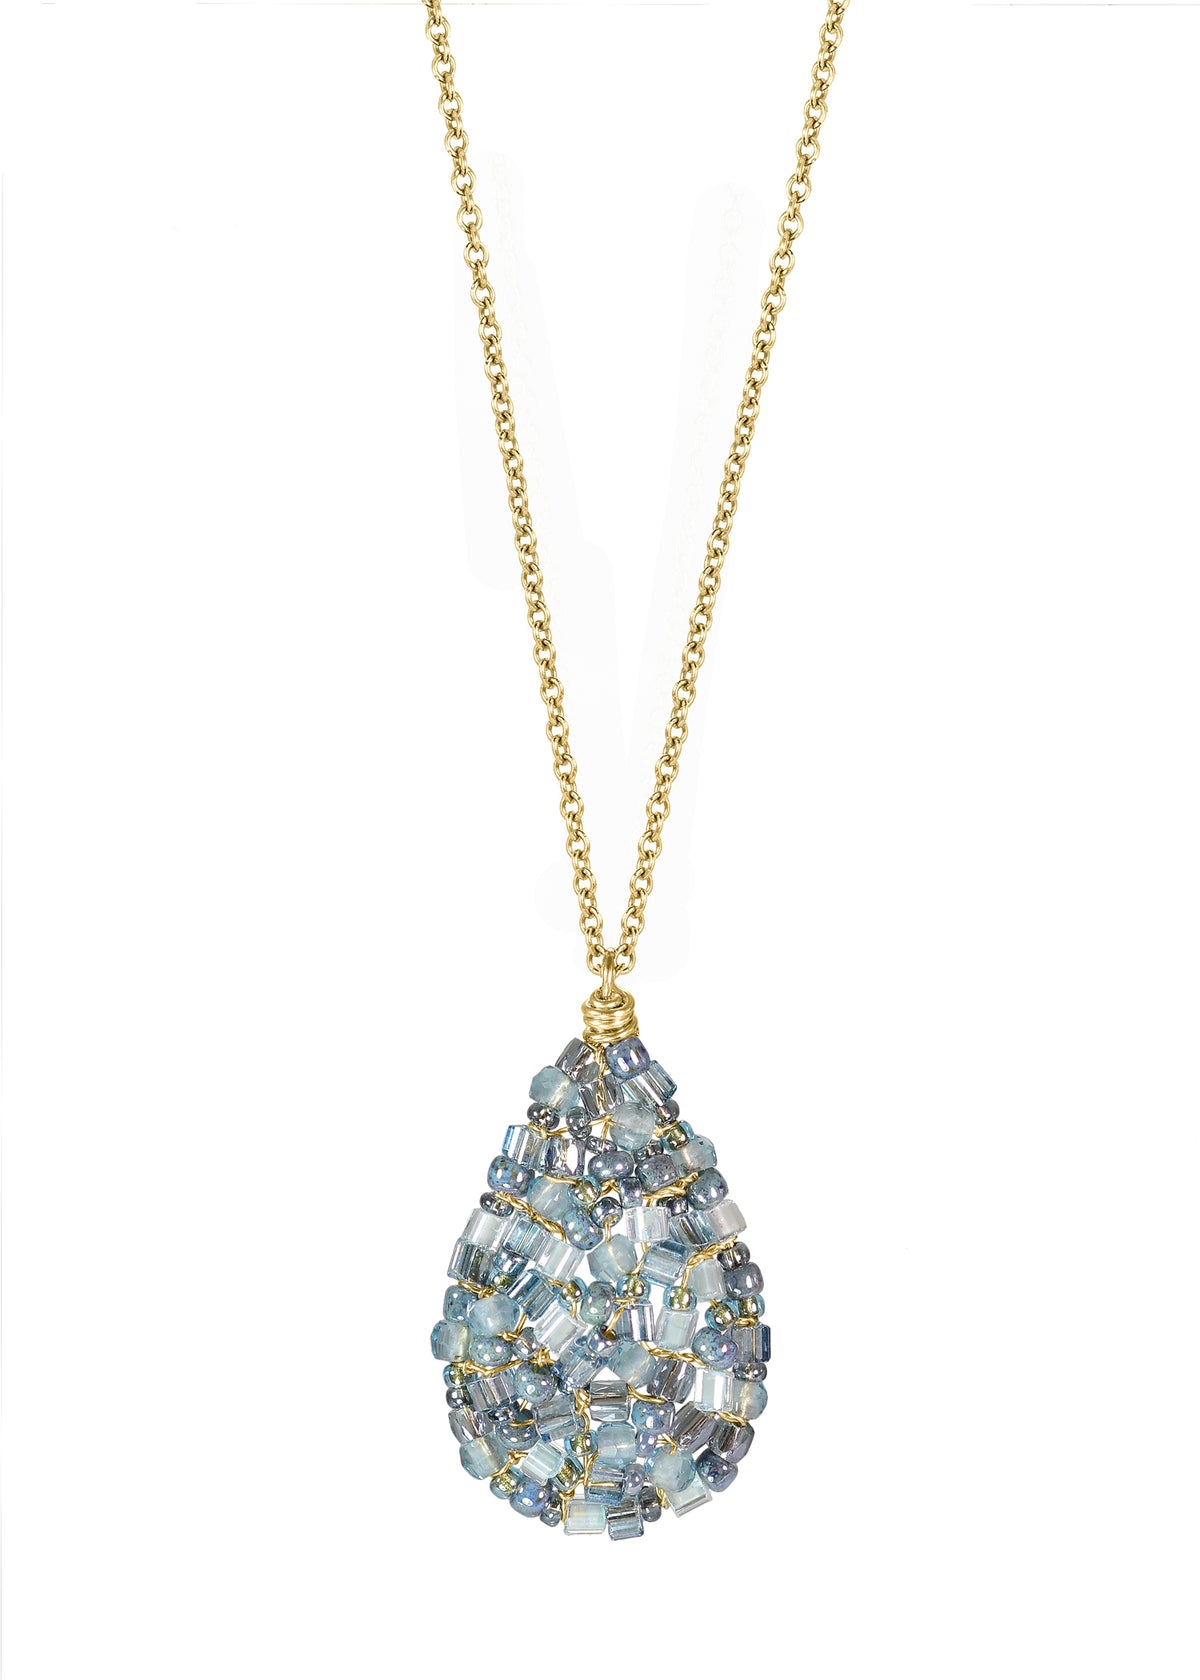 Aqua quartz Seed beads 14k gold fill Necklace measures 16&quot; in length Pendant measures 1&quot; in length and 5/8&quot; in width at the widest point Handmade in our Los Angeles studio